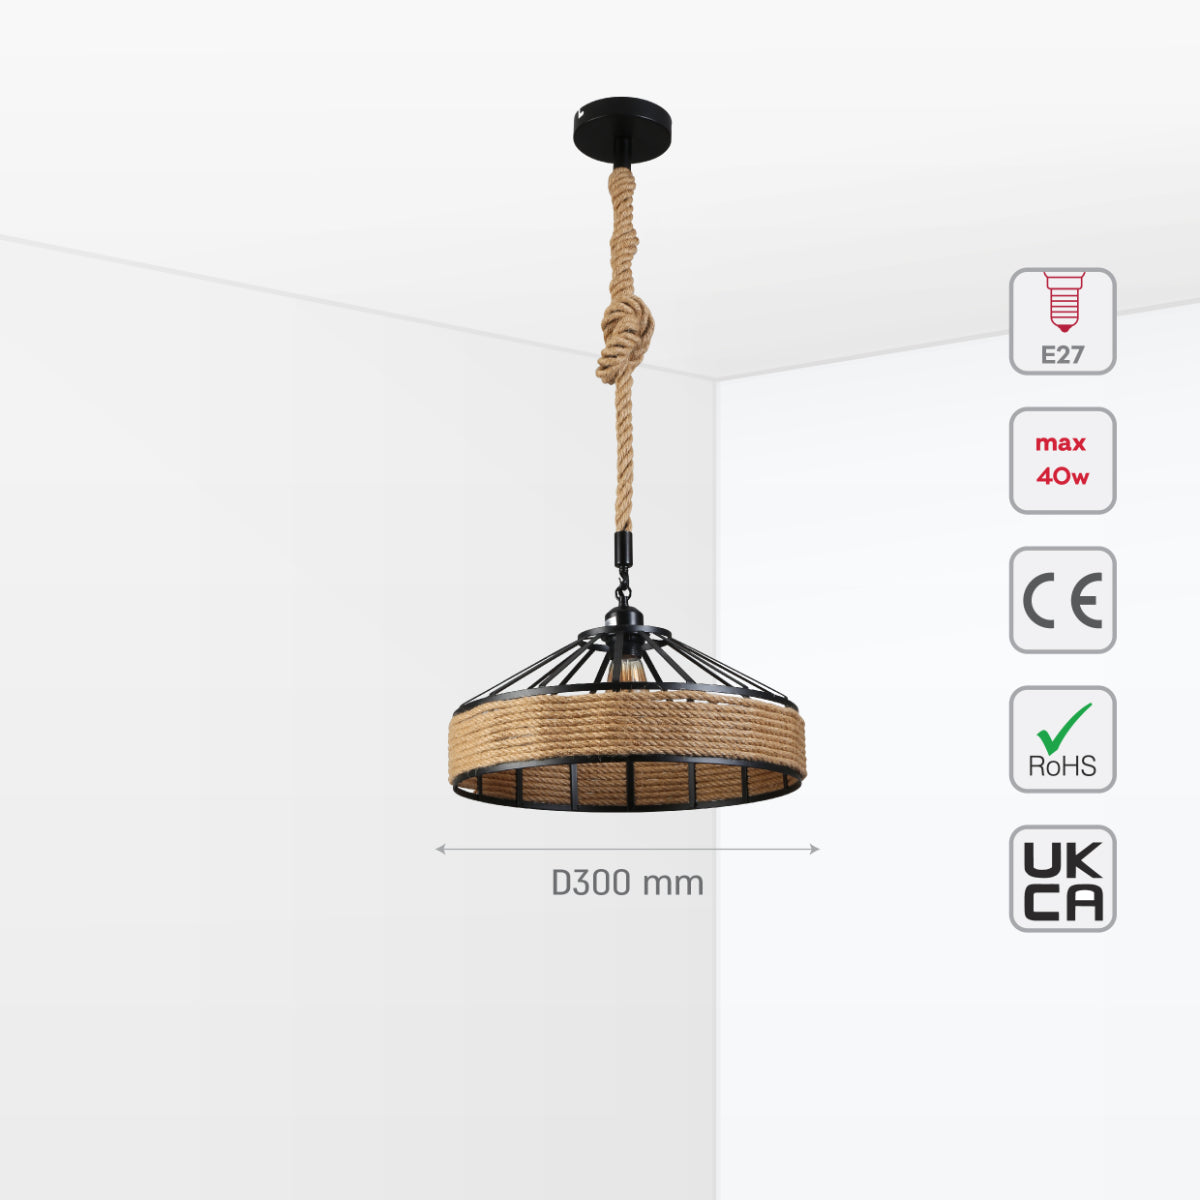 Size and certifications of Black Metal Hemp Rope Cage Pendant Ceiling Light E27 159-18124